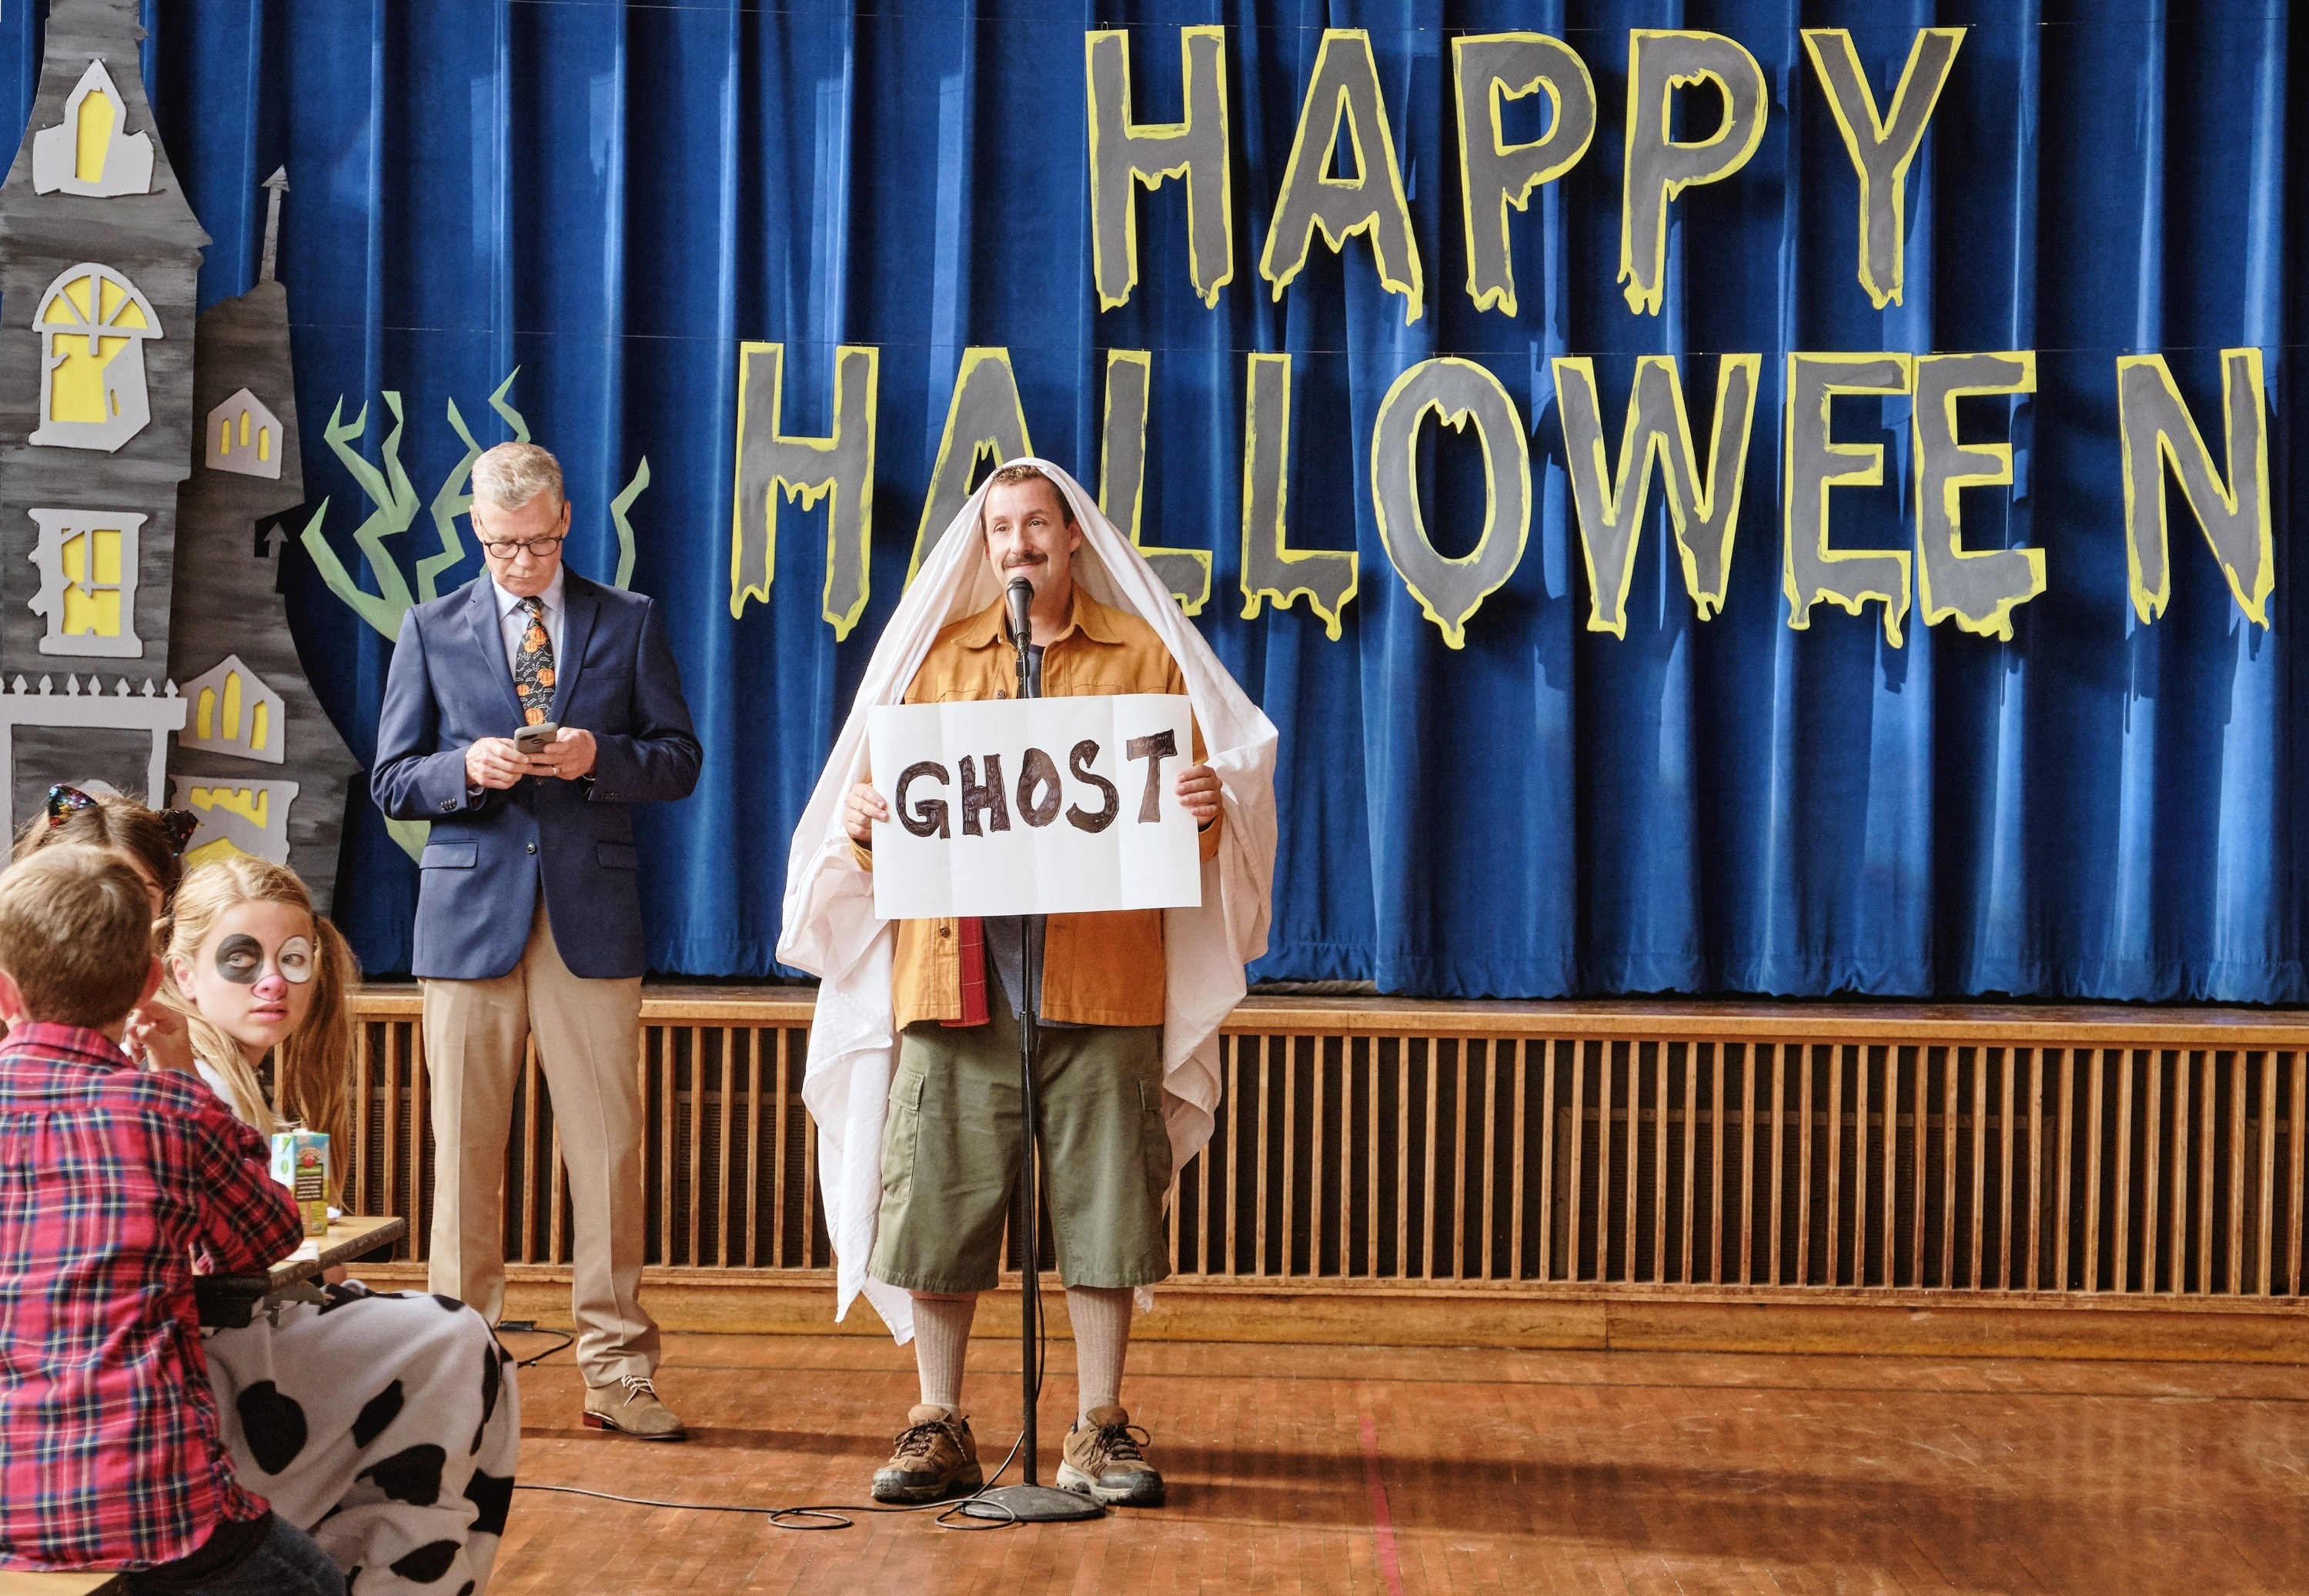 Adam Sandler smiling while holding up a sign that says &#x27;ghost.&#x27;